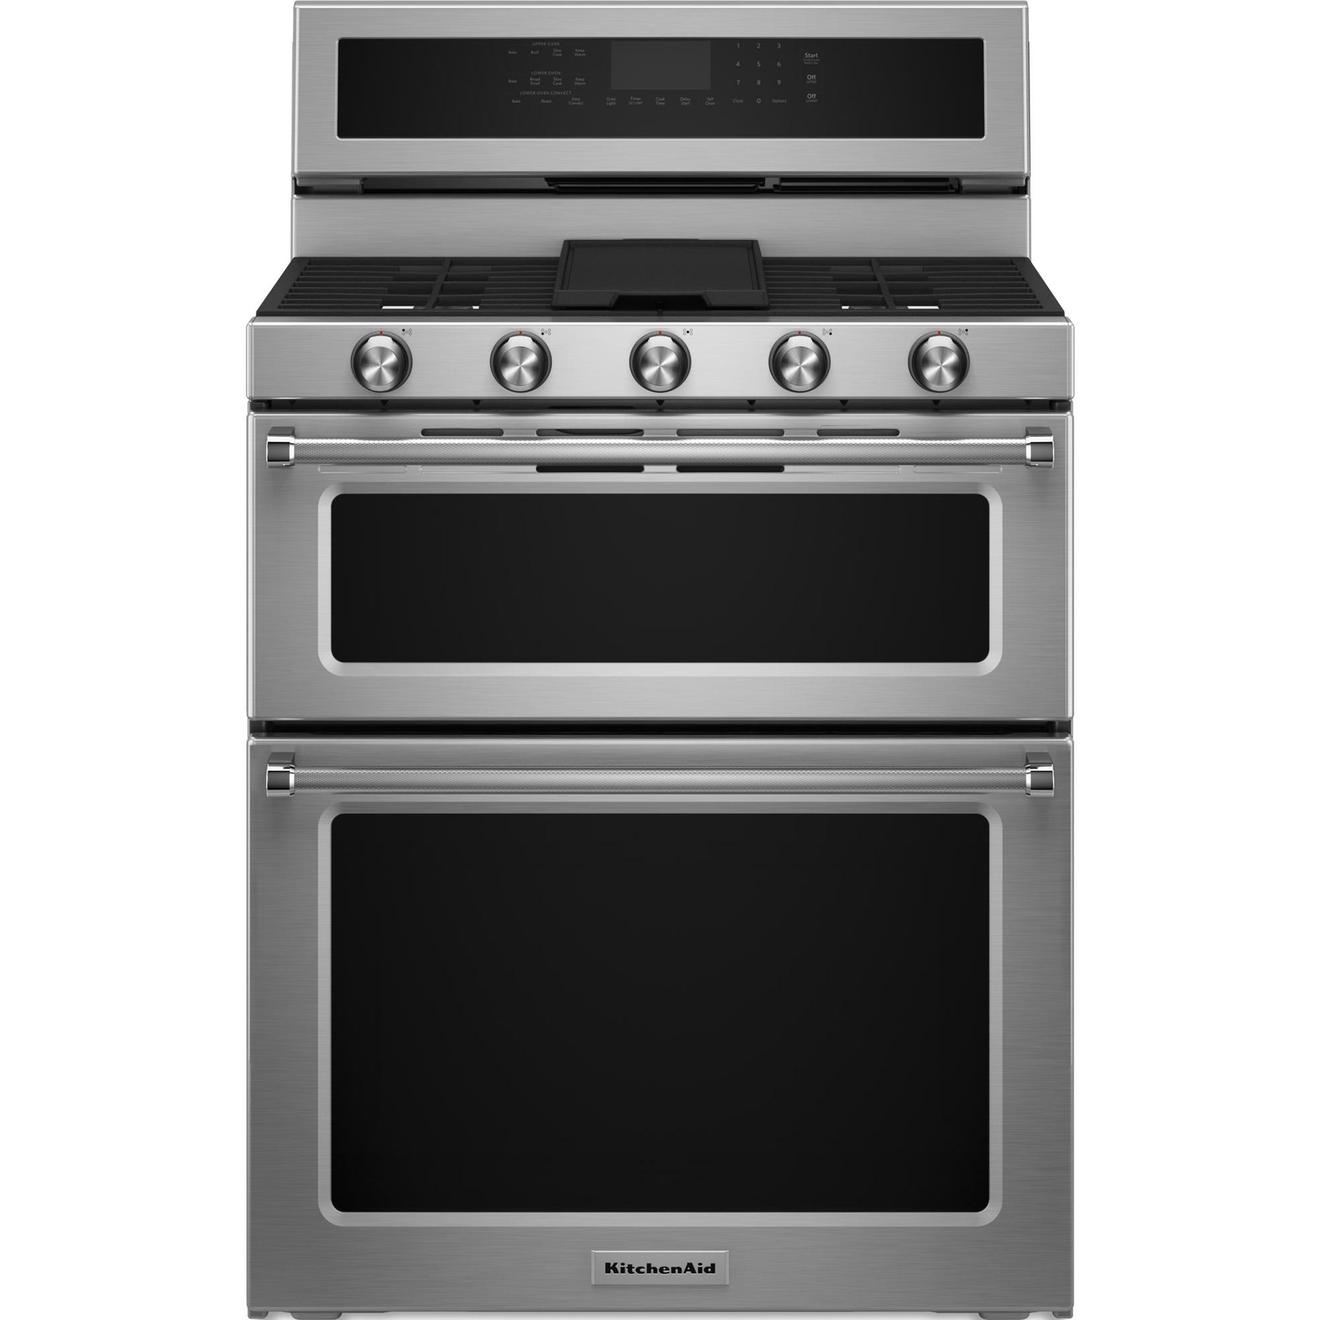 KitchenAid 30 inch Double Oven Dual Fuel Range offers at $3099.98 in Trail Appliances